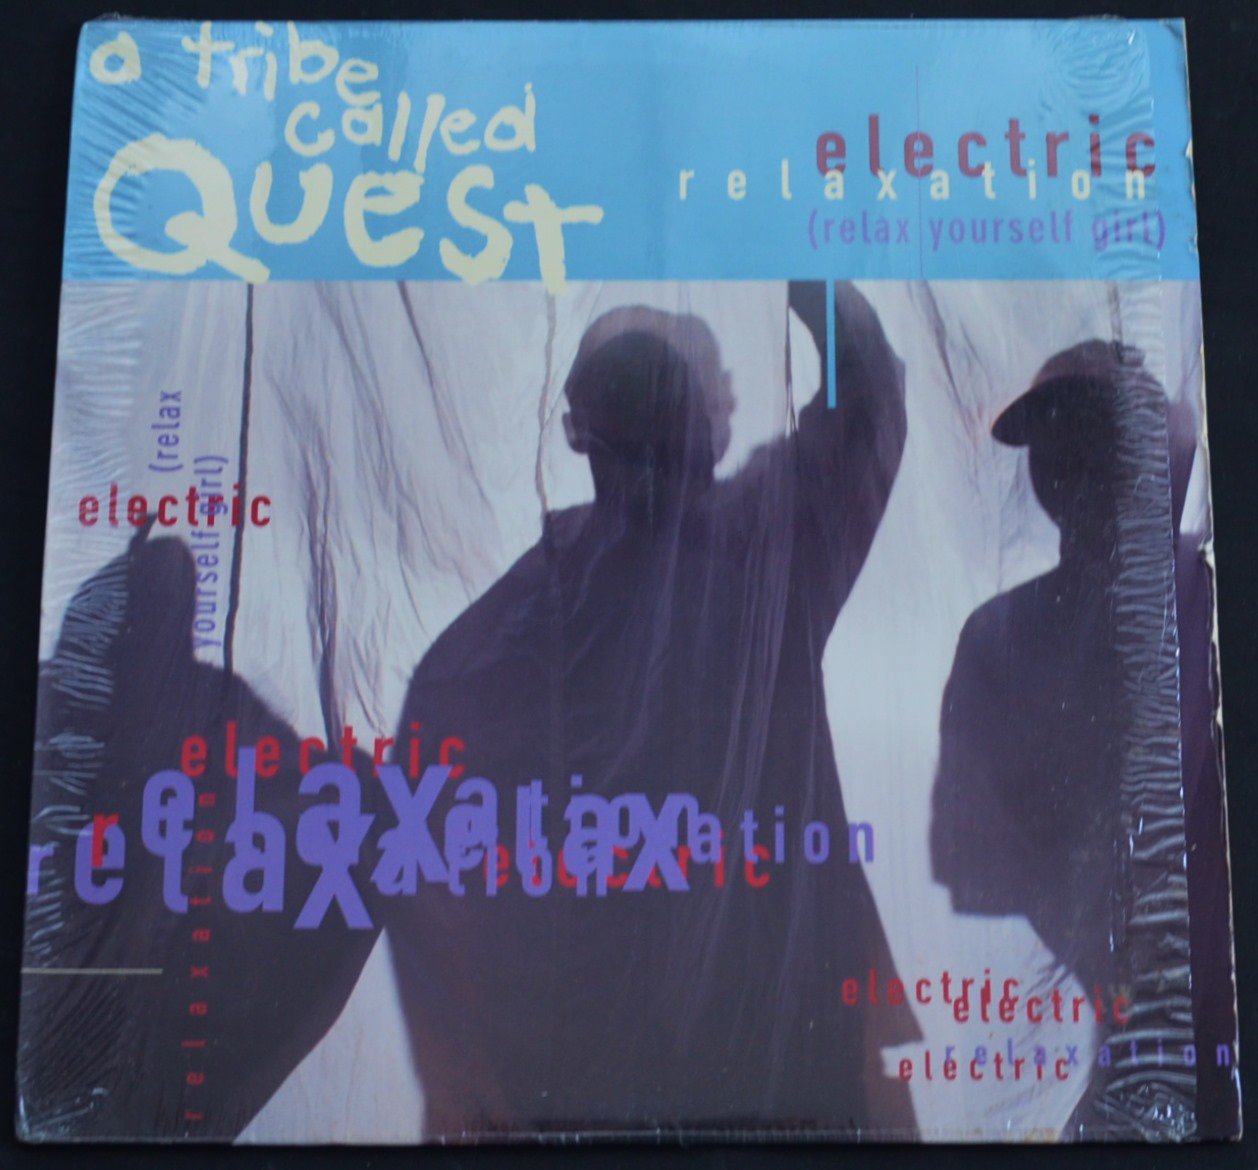 A TRIBE CALLED QUEST ‎/ ELECTRIC RELAXATION (RELAX YOURSELF GIRL) / MIDNIGHT (12